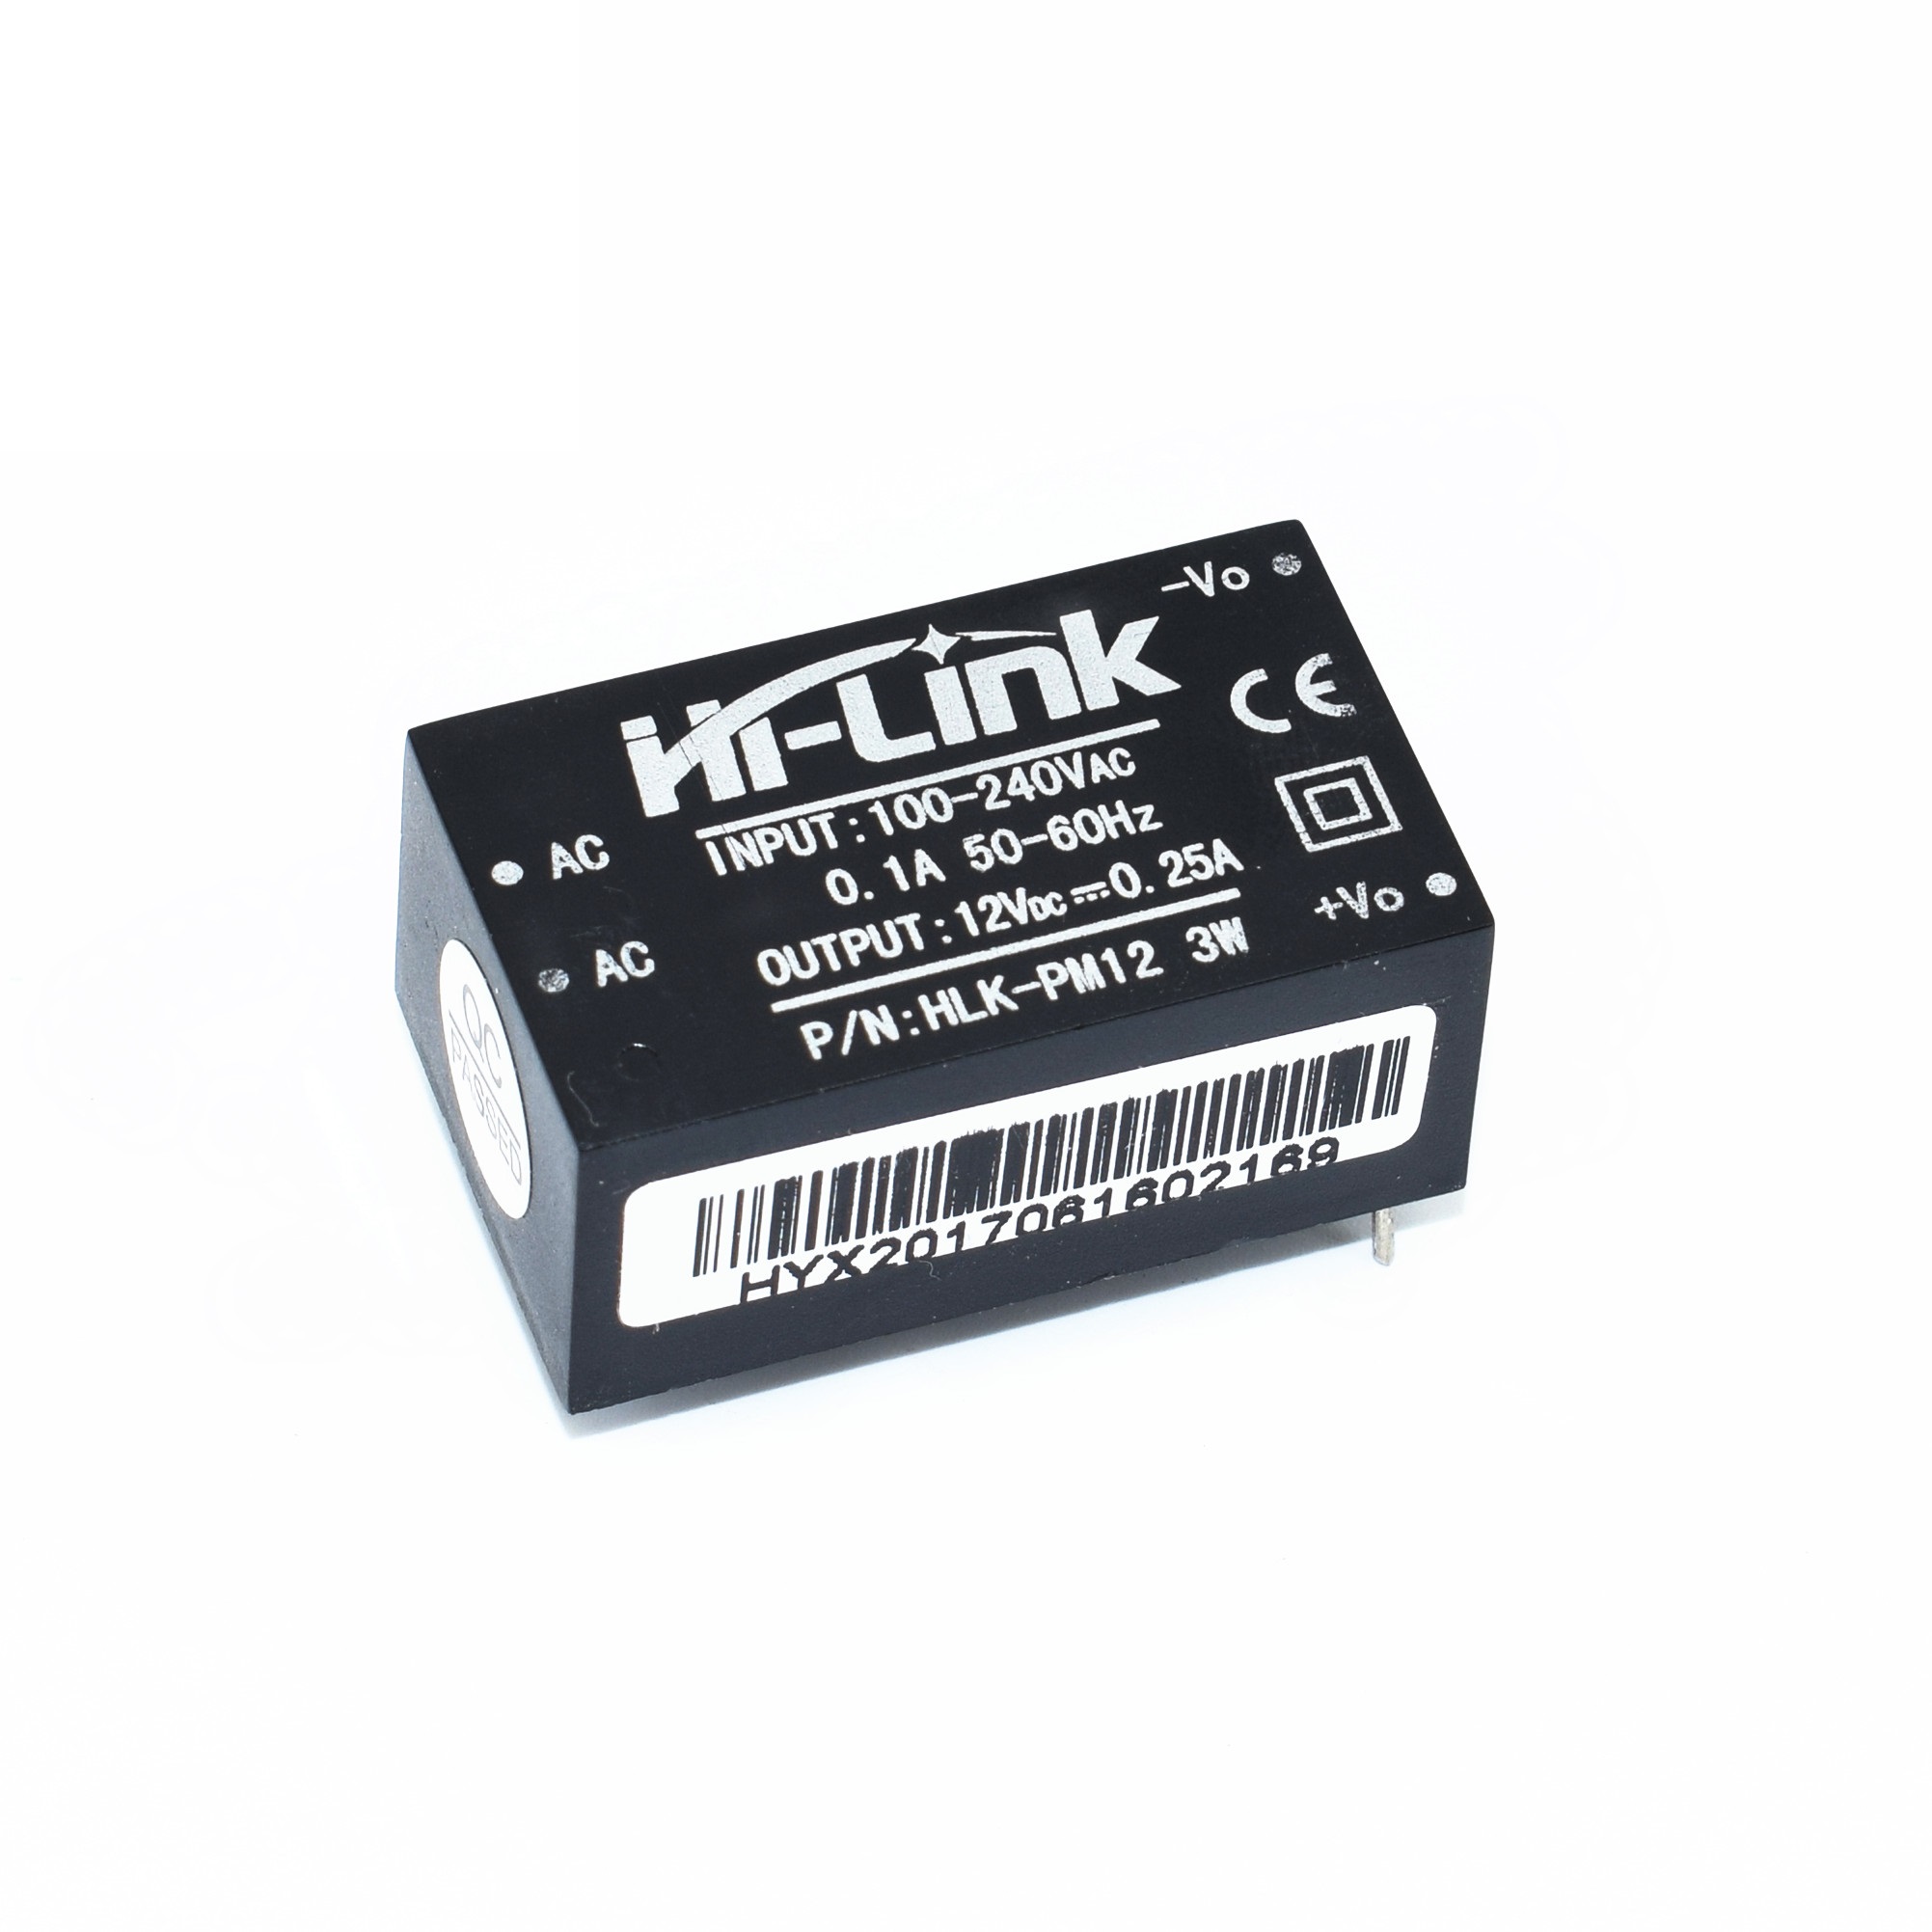 Buy Online HLK-PM12 220V AC to 12V DC Mini Power Supply Module 3W HILINK at  Lowest Price